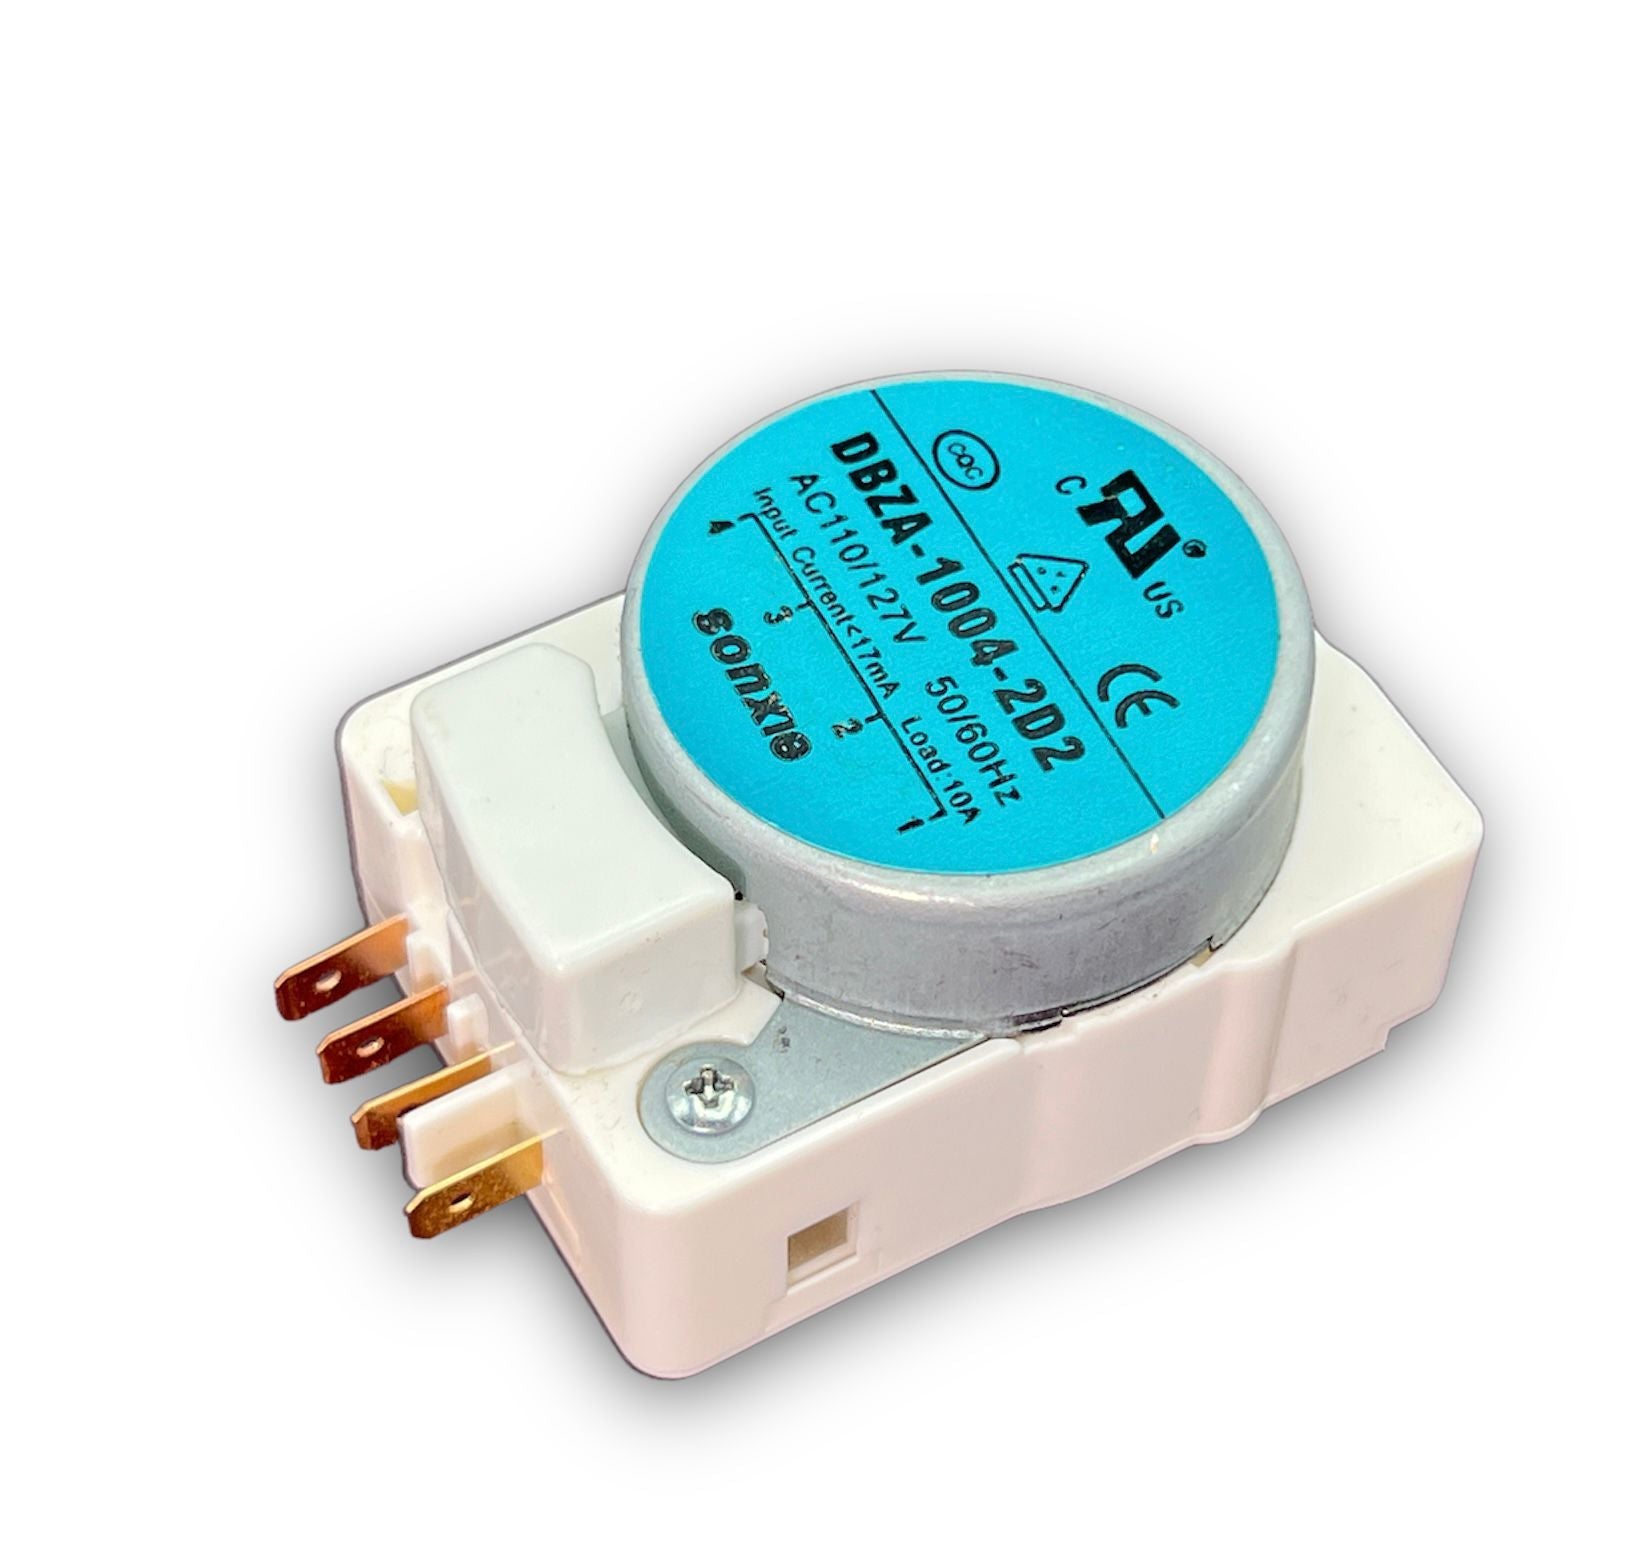 G.E Refrigerator Defrost Timer - WR09X22737, Replaces: WR09X22026 4589660 AP5971470 PS11701230 EAP11701230 PD00053786